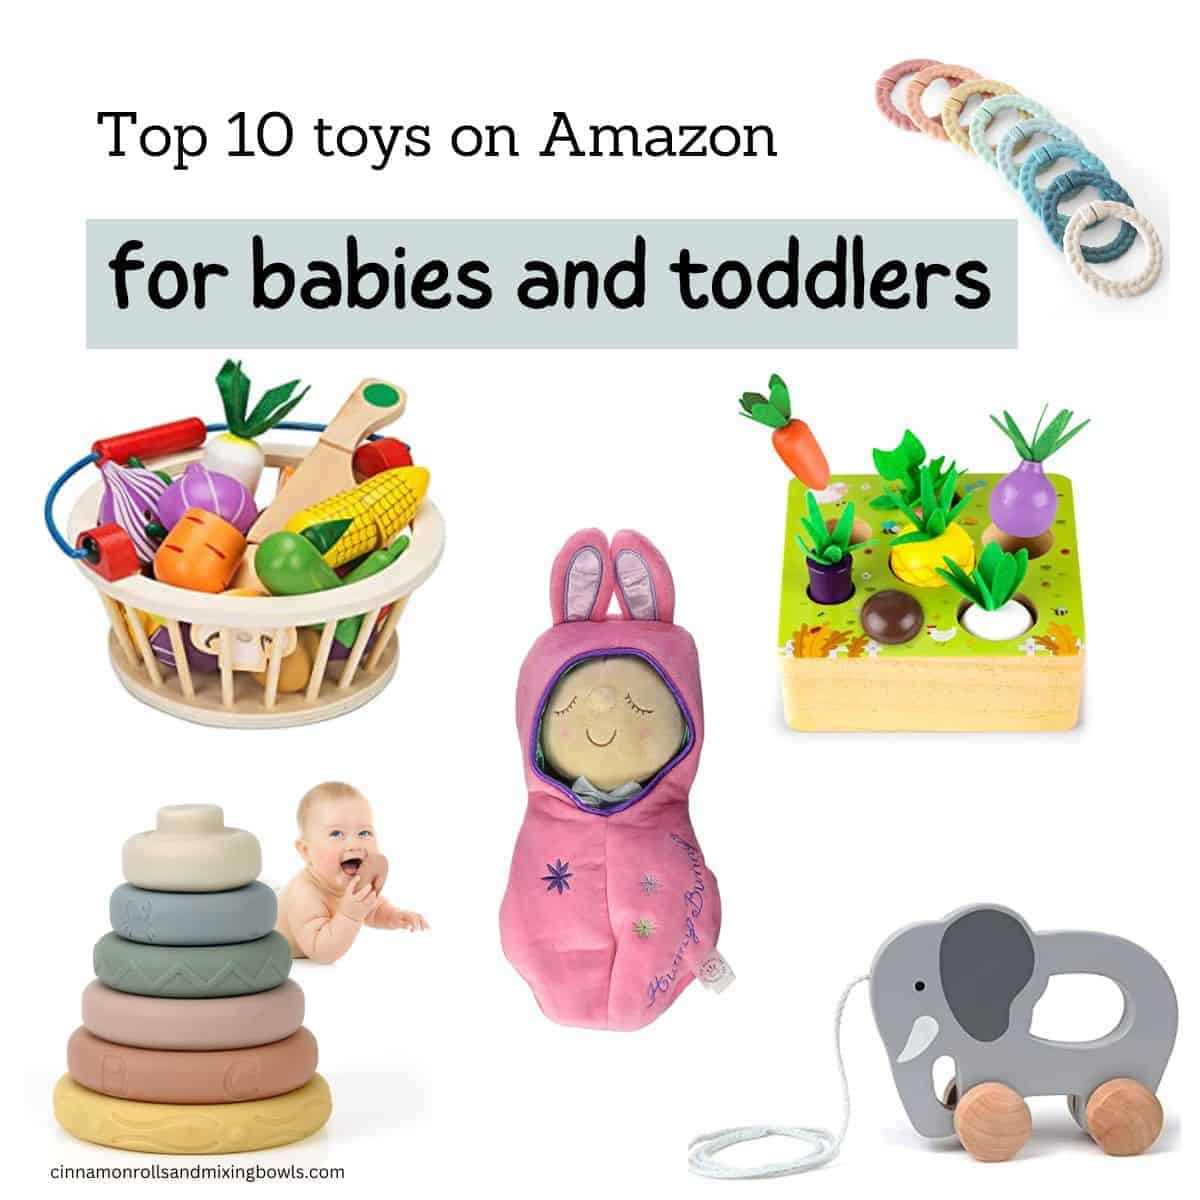 Top 10 toys on amazon for babies and toddlers